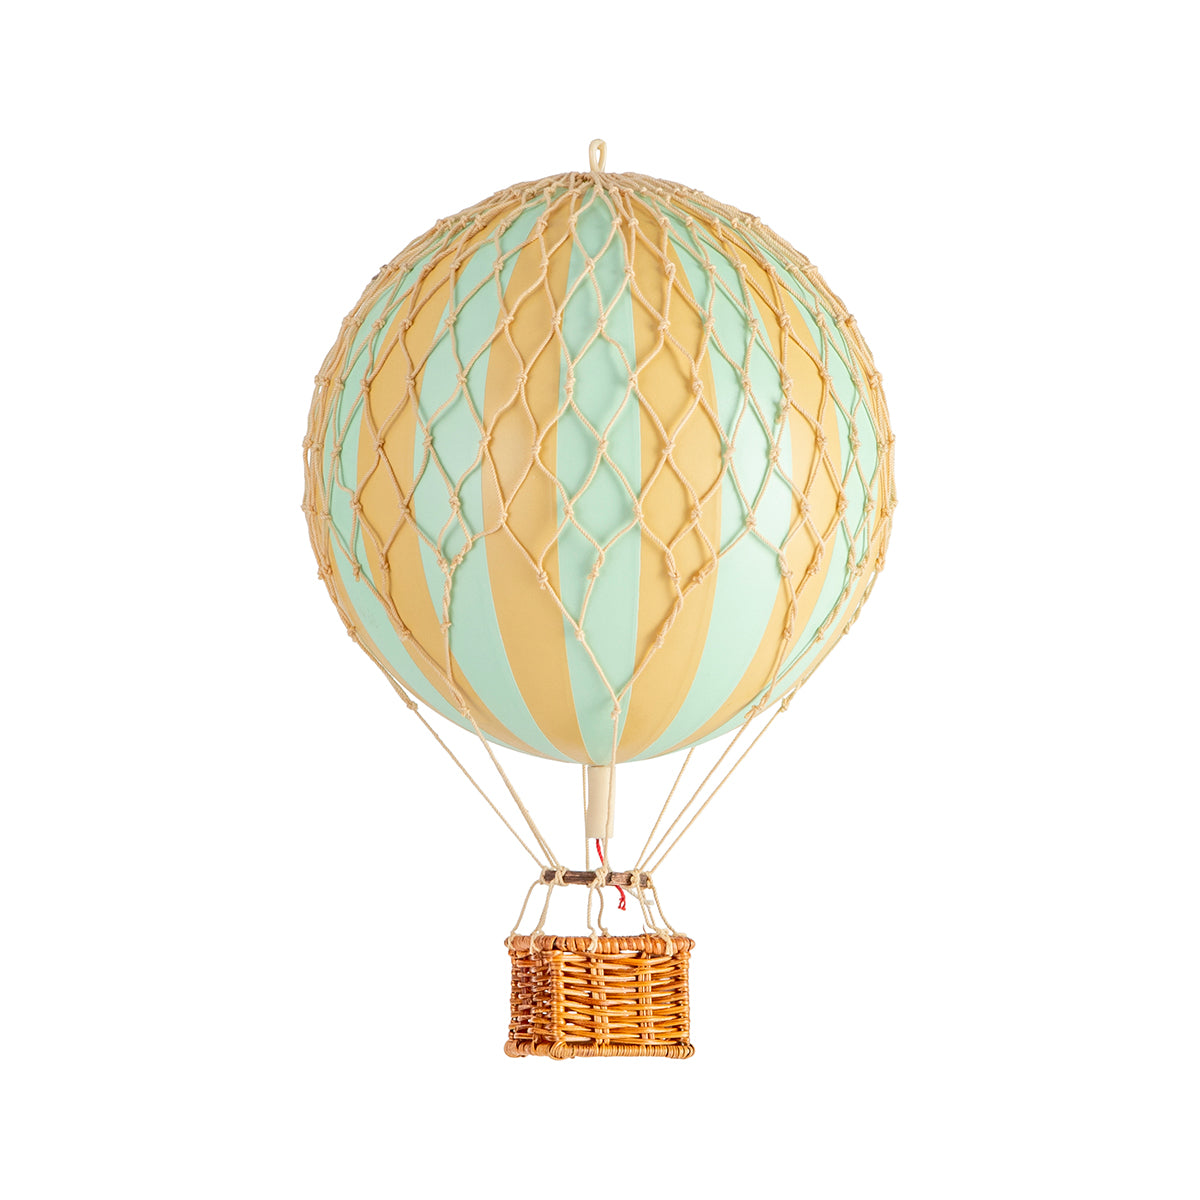 A quirky Wonderen Small Hot Air Balloon - Travels Light with a wicker basket that merges artistry and science.